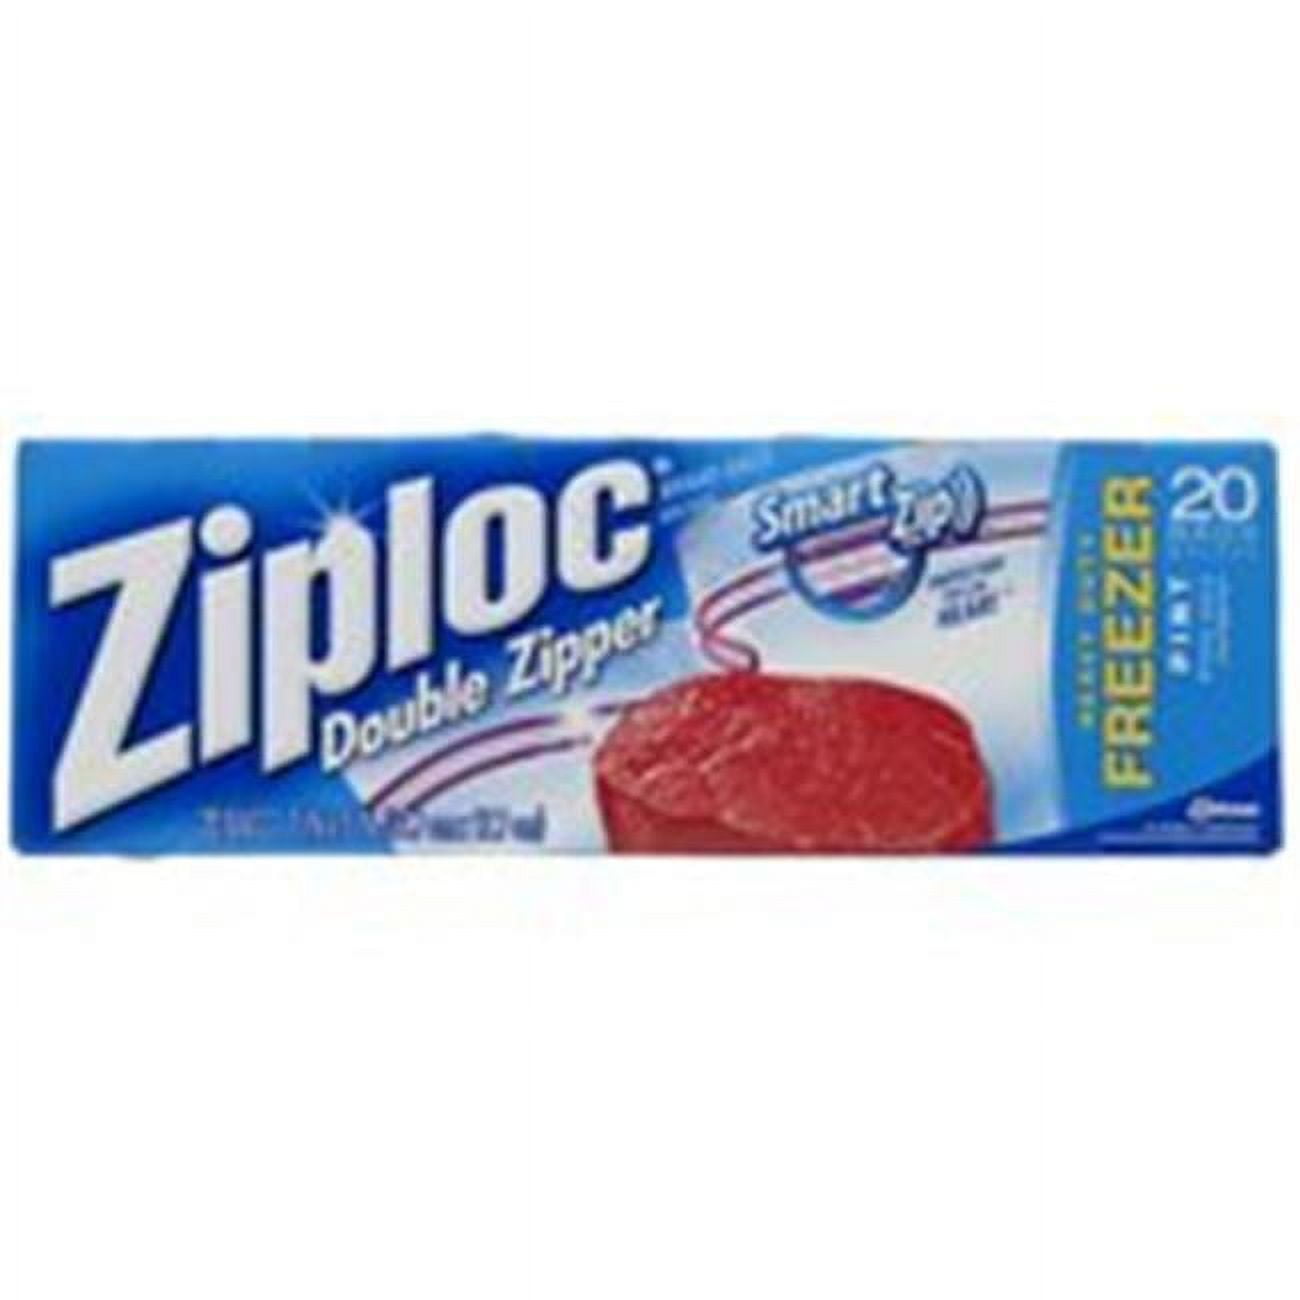 Ziploc Freezer Bags Double Zipper Pint Size, 20 Ct -   Online Kosher Grocery Shopping and Delivery Service